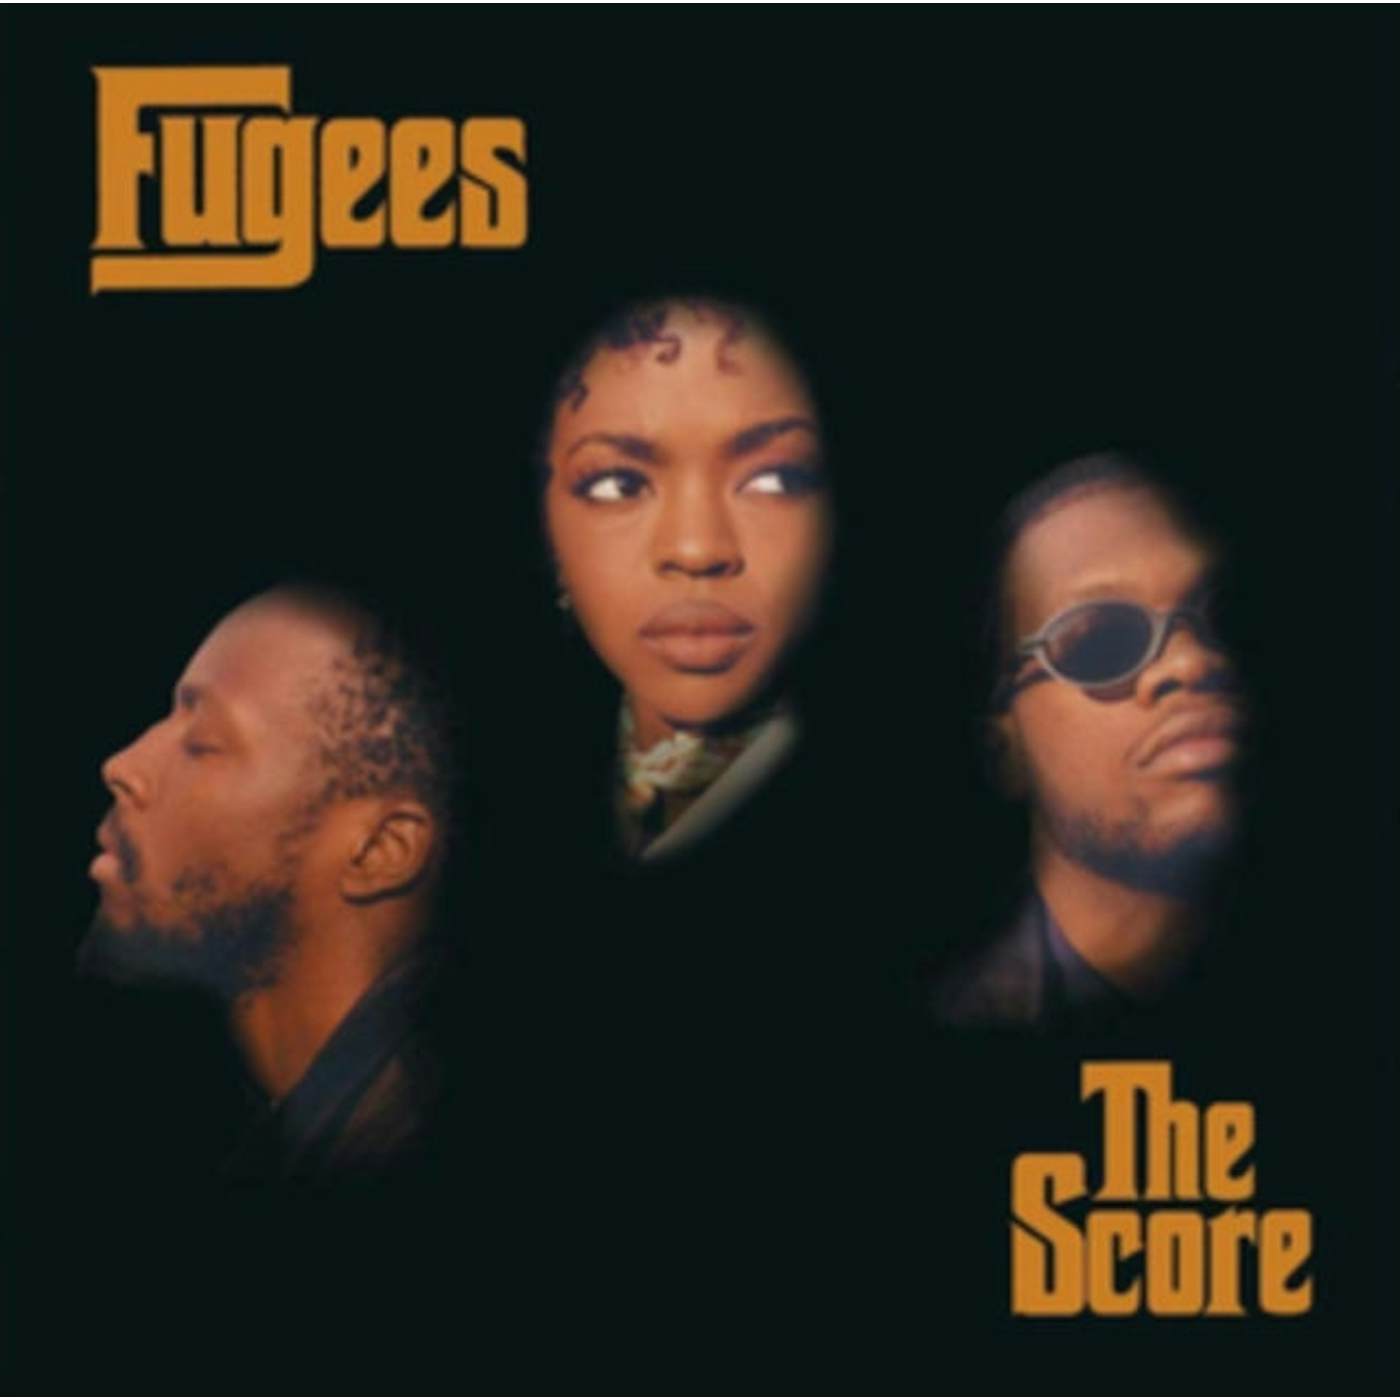 Fugees CD - The Score